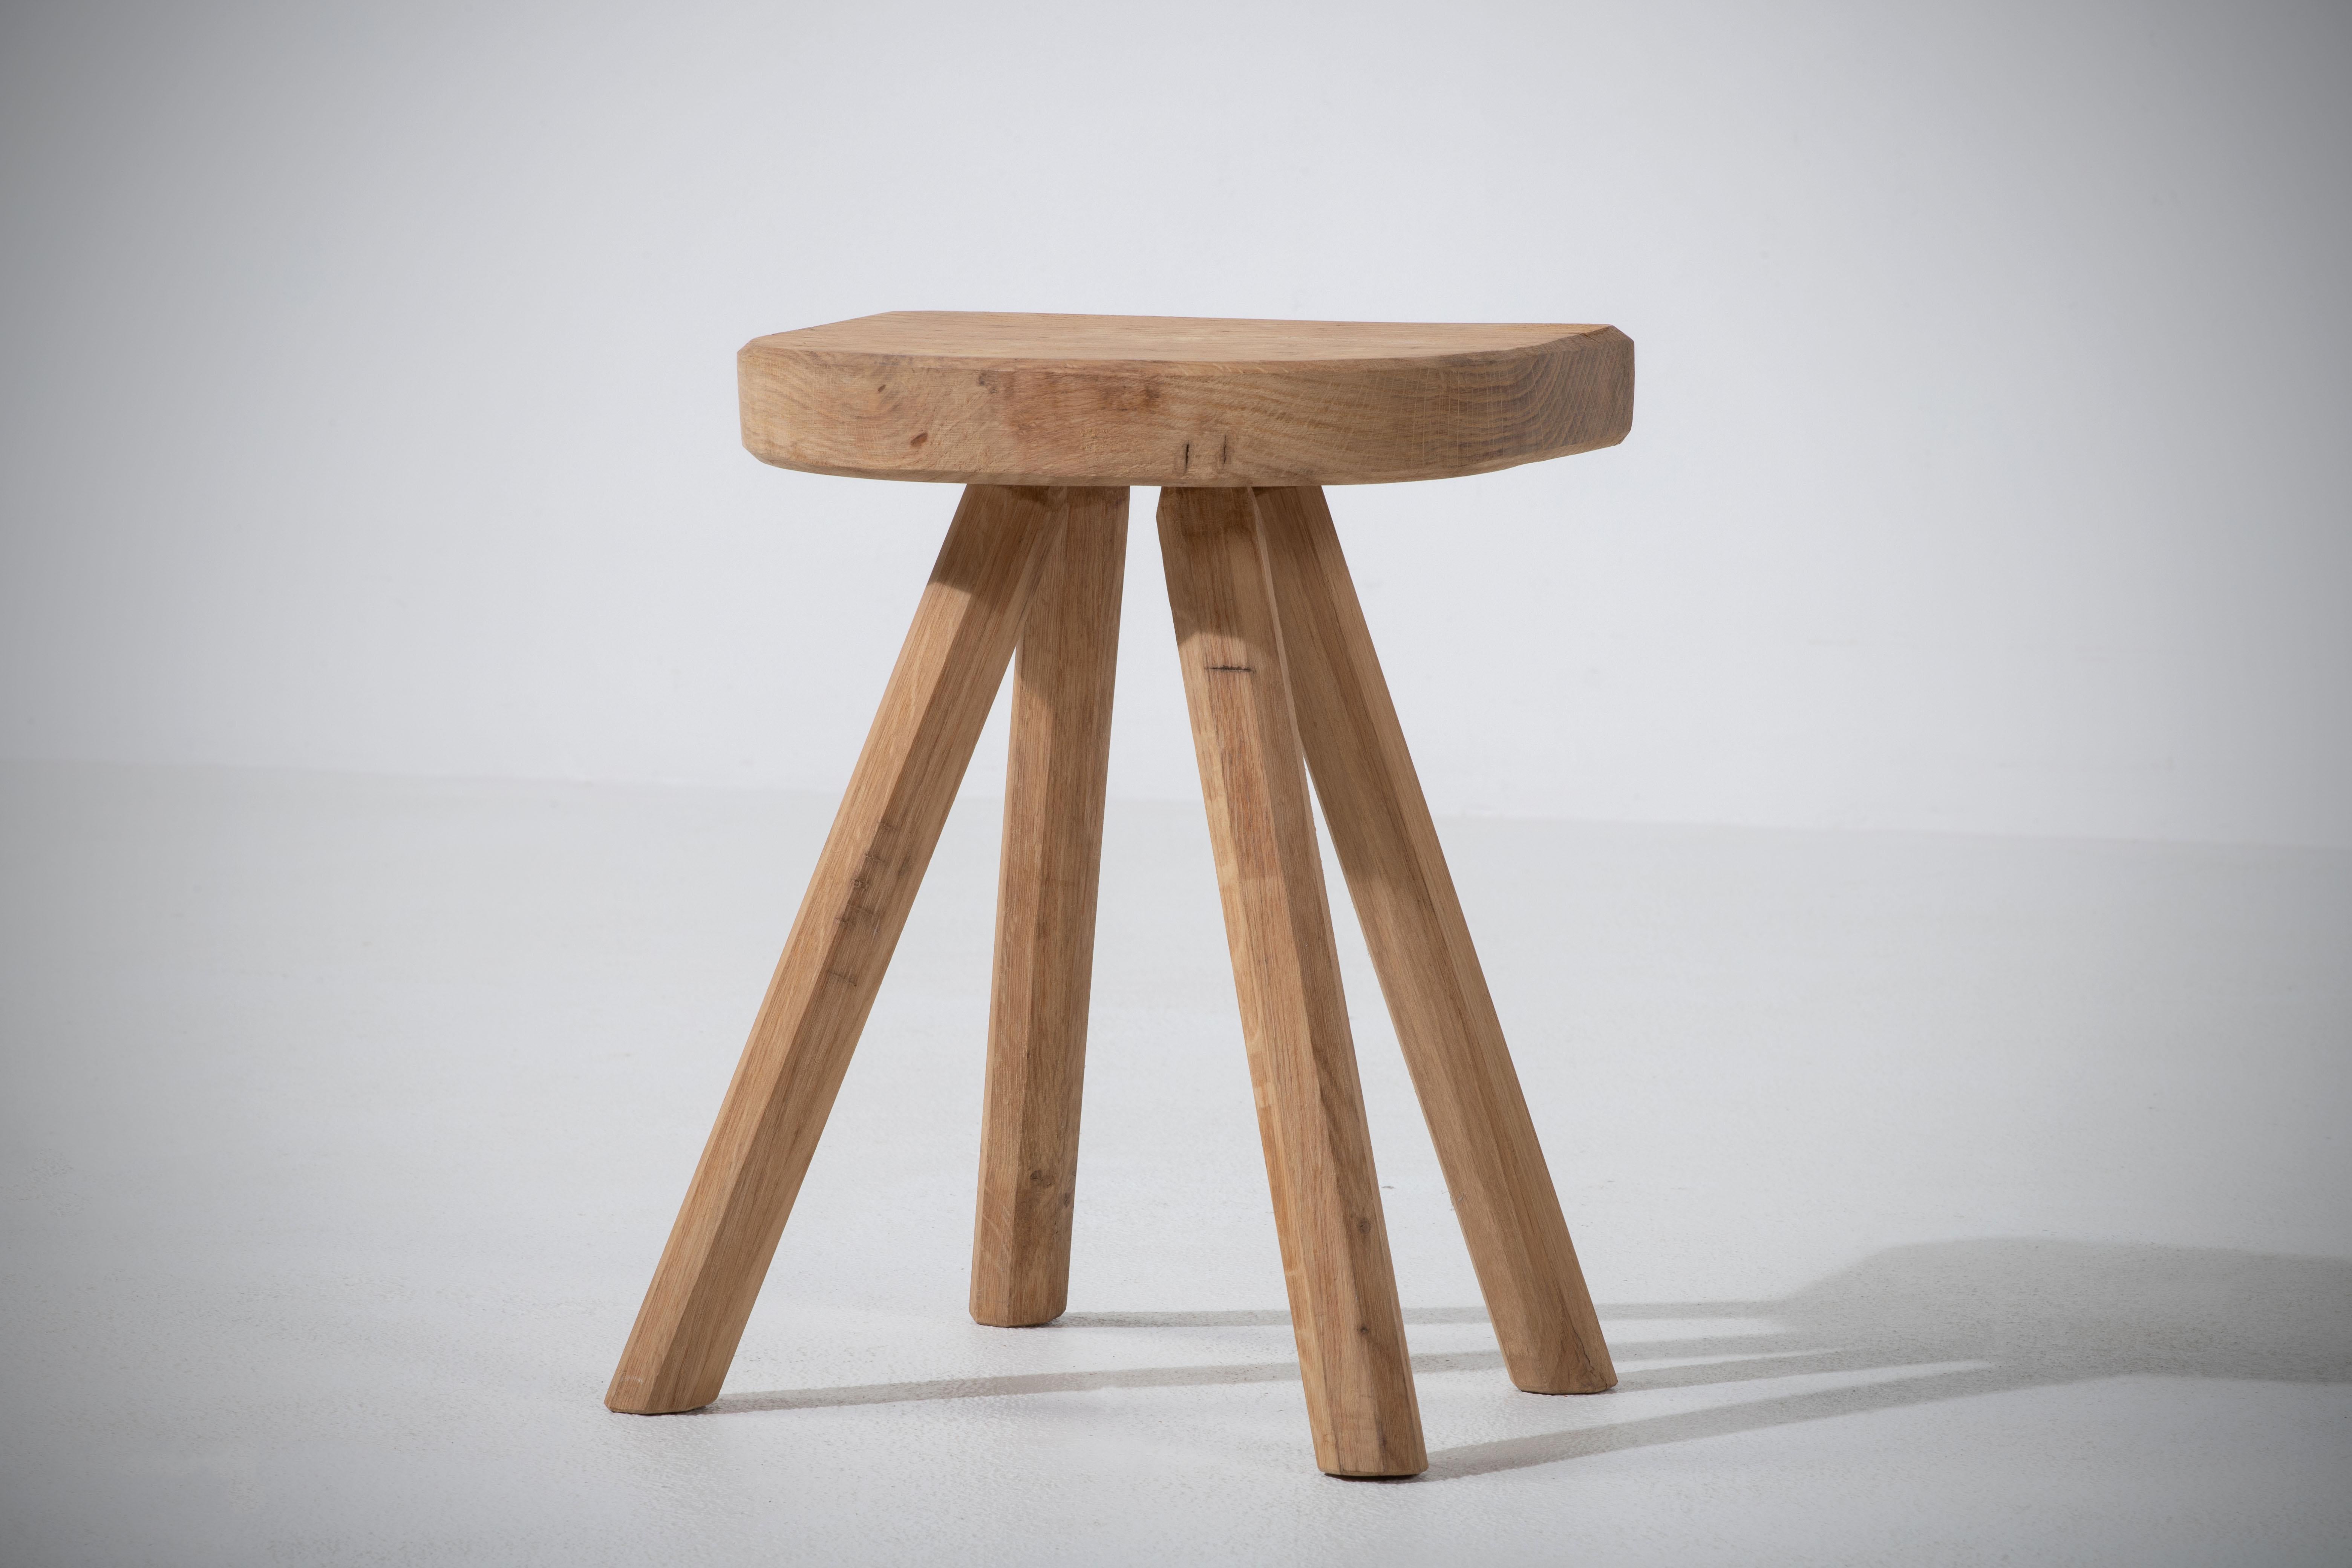 French Midcentury Oak Stool, Tripod Flared Feet, 1920s For Sale 4